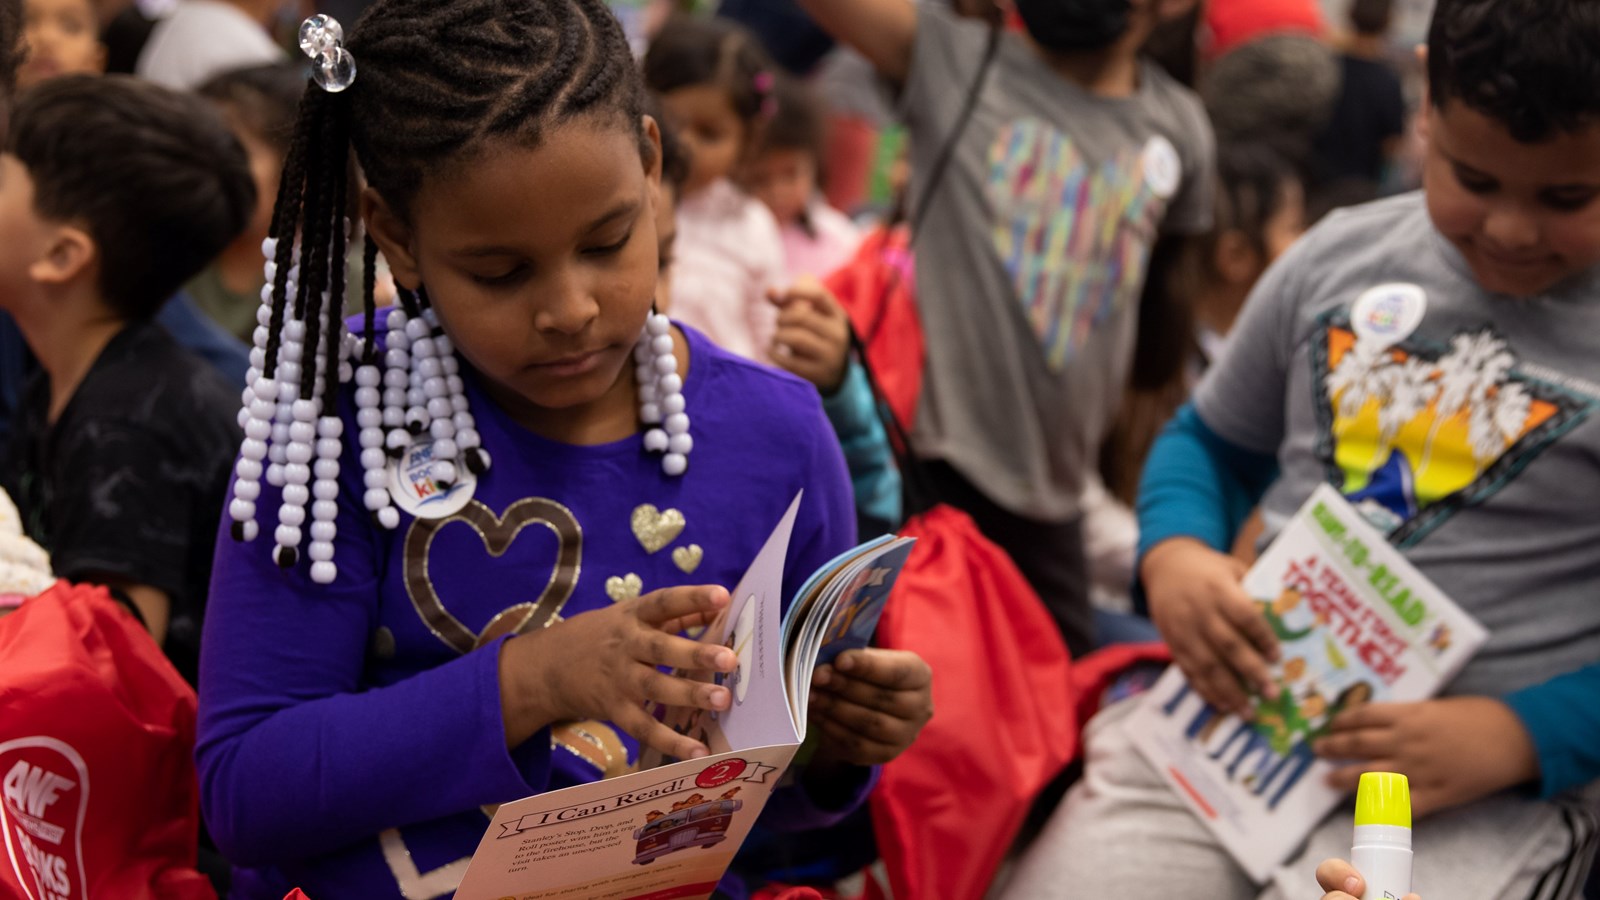 Fair Oaks Elementary School students read through the books they received during a community donation.